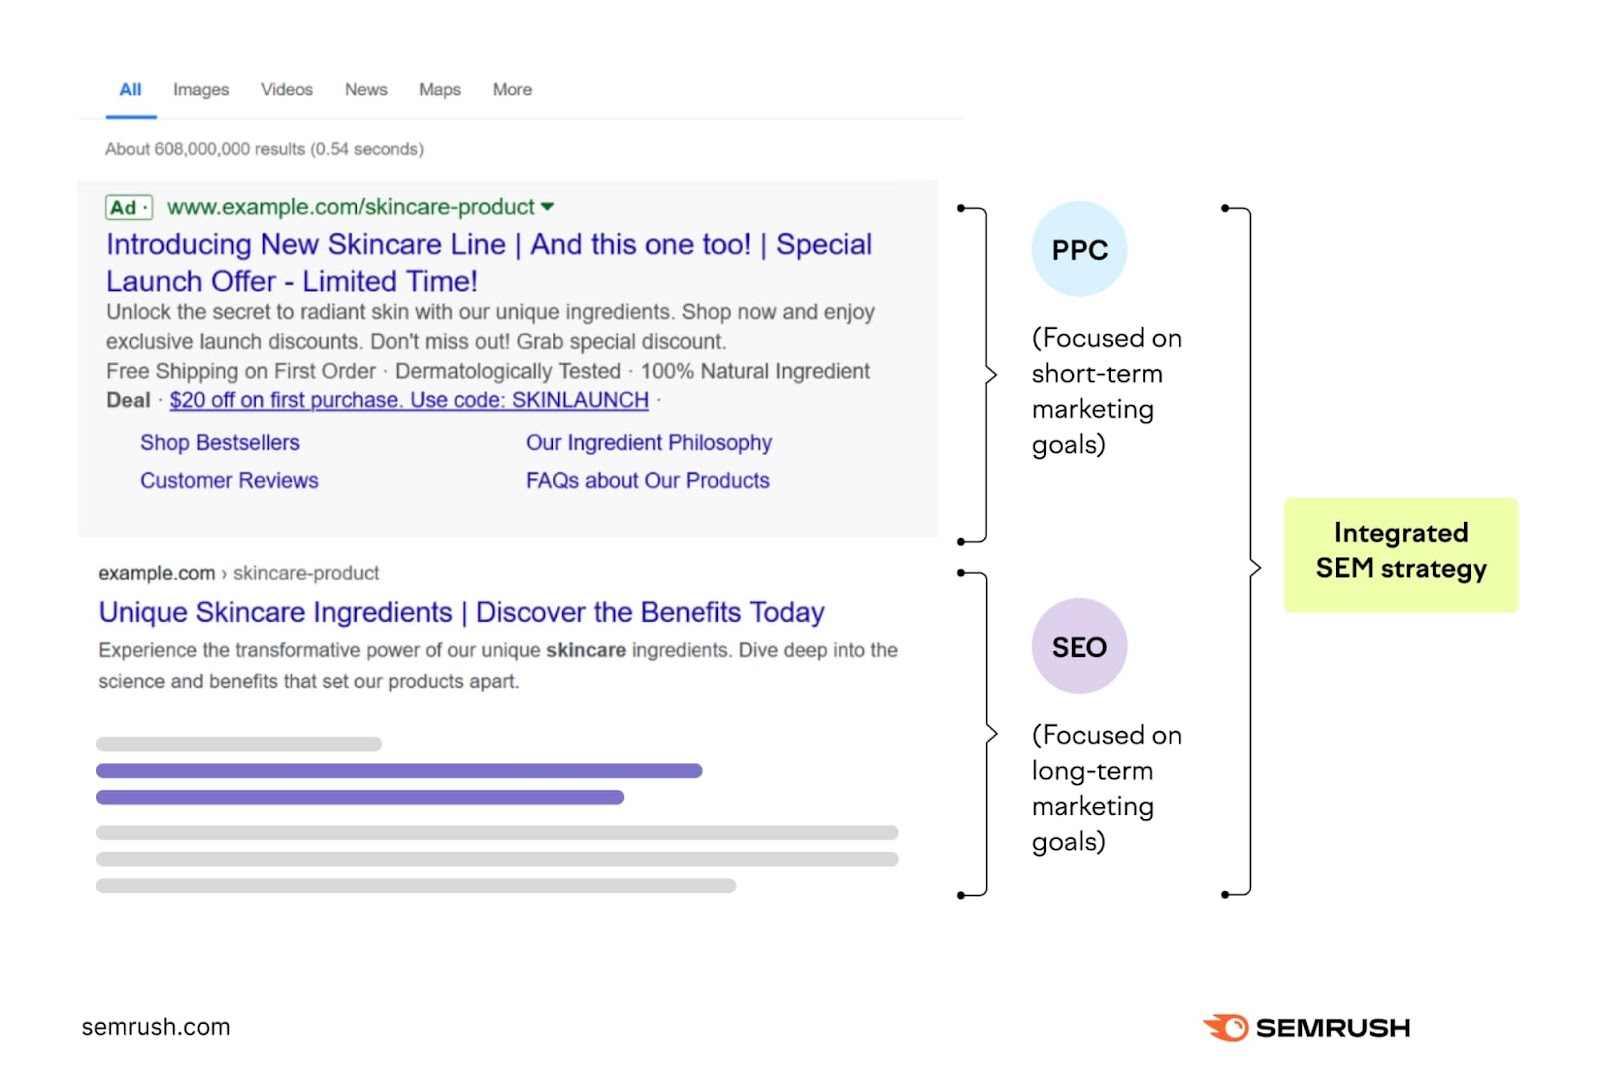 Integrated SEM strategy incorporates SEO and paid search practices